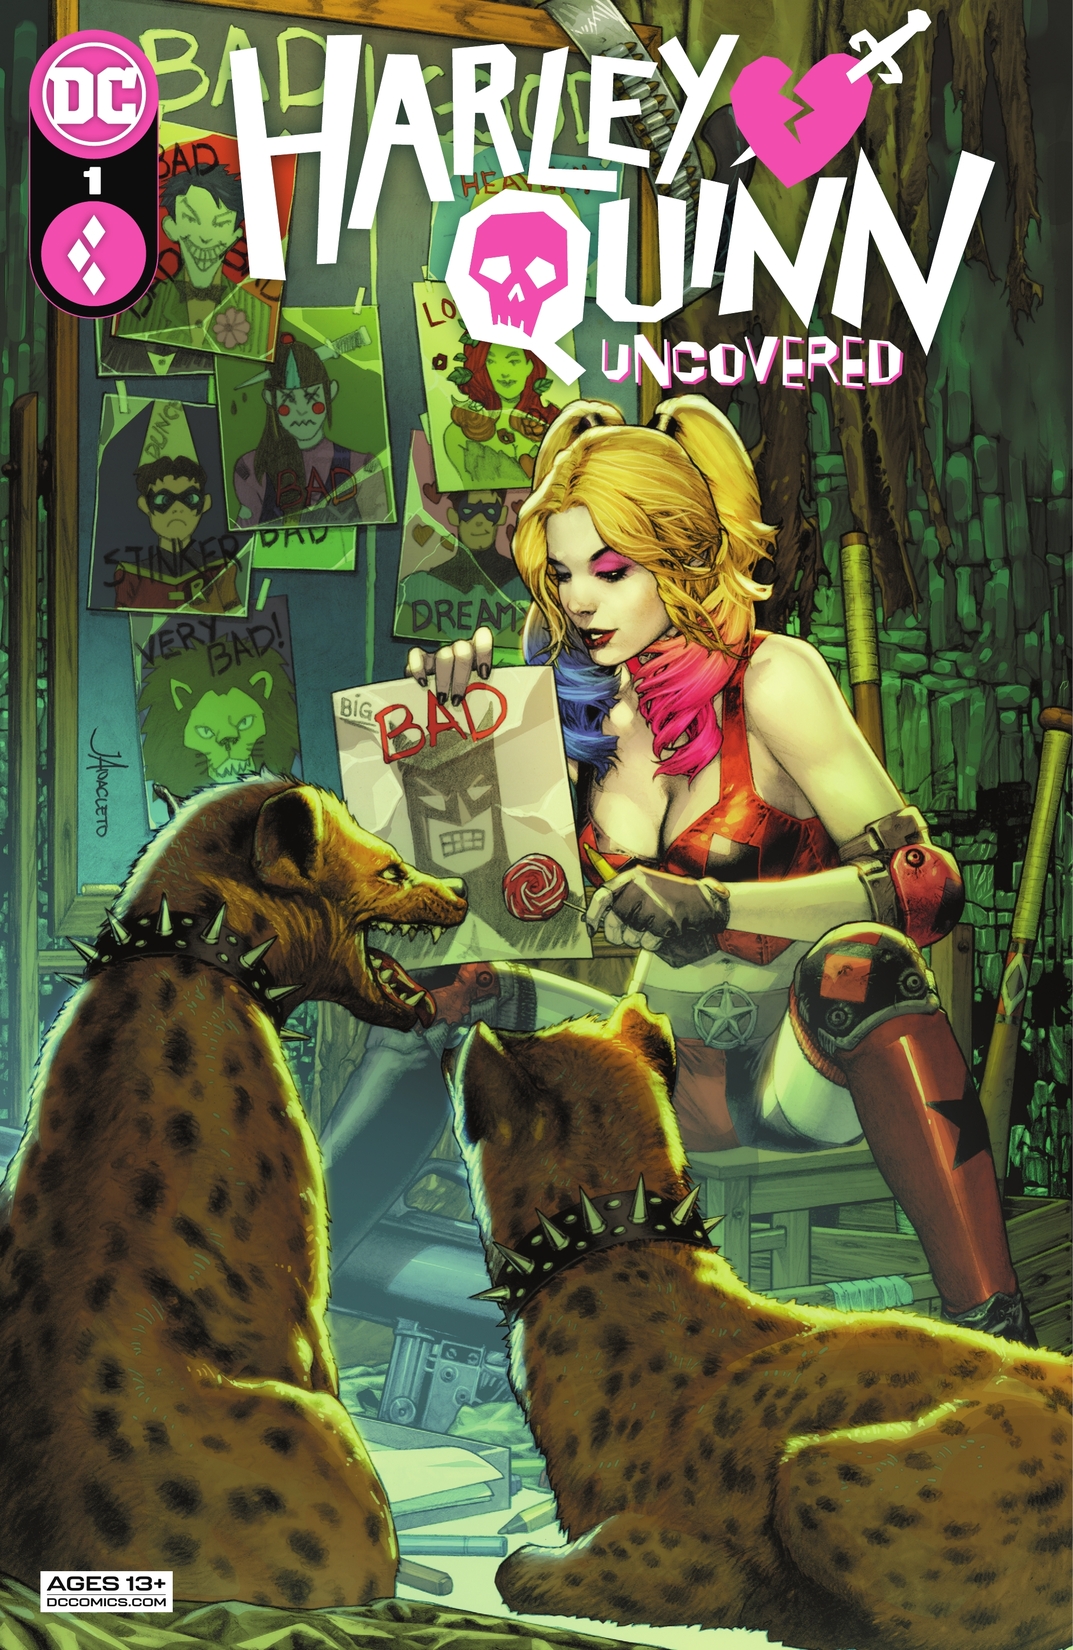 Harley Quinn: Uncovered #1 preview images